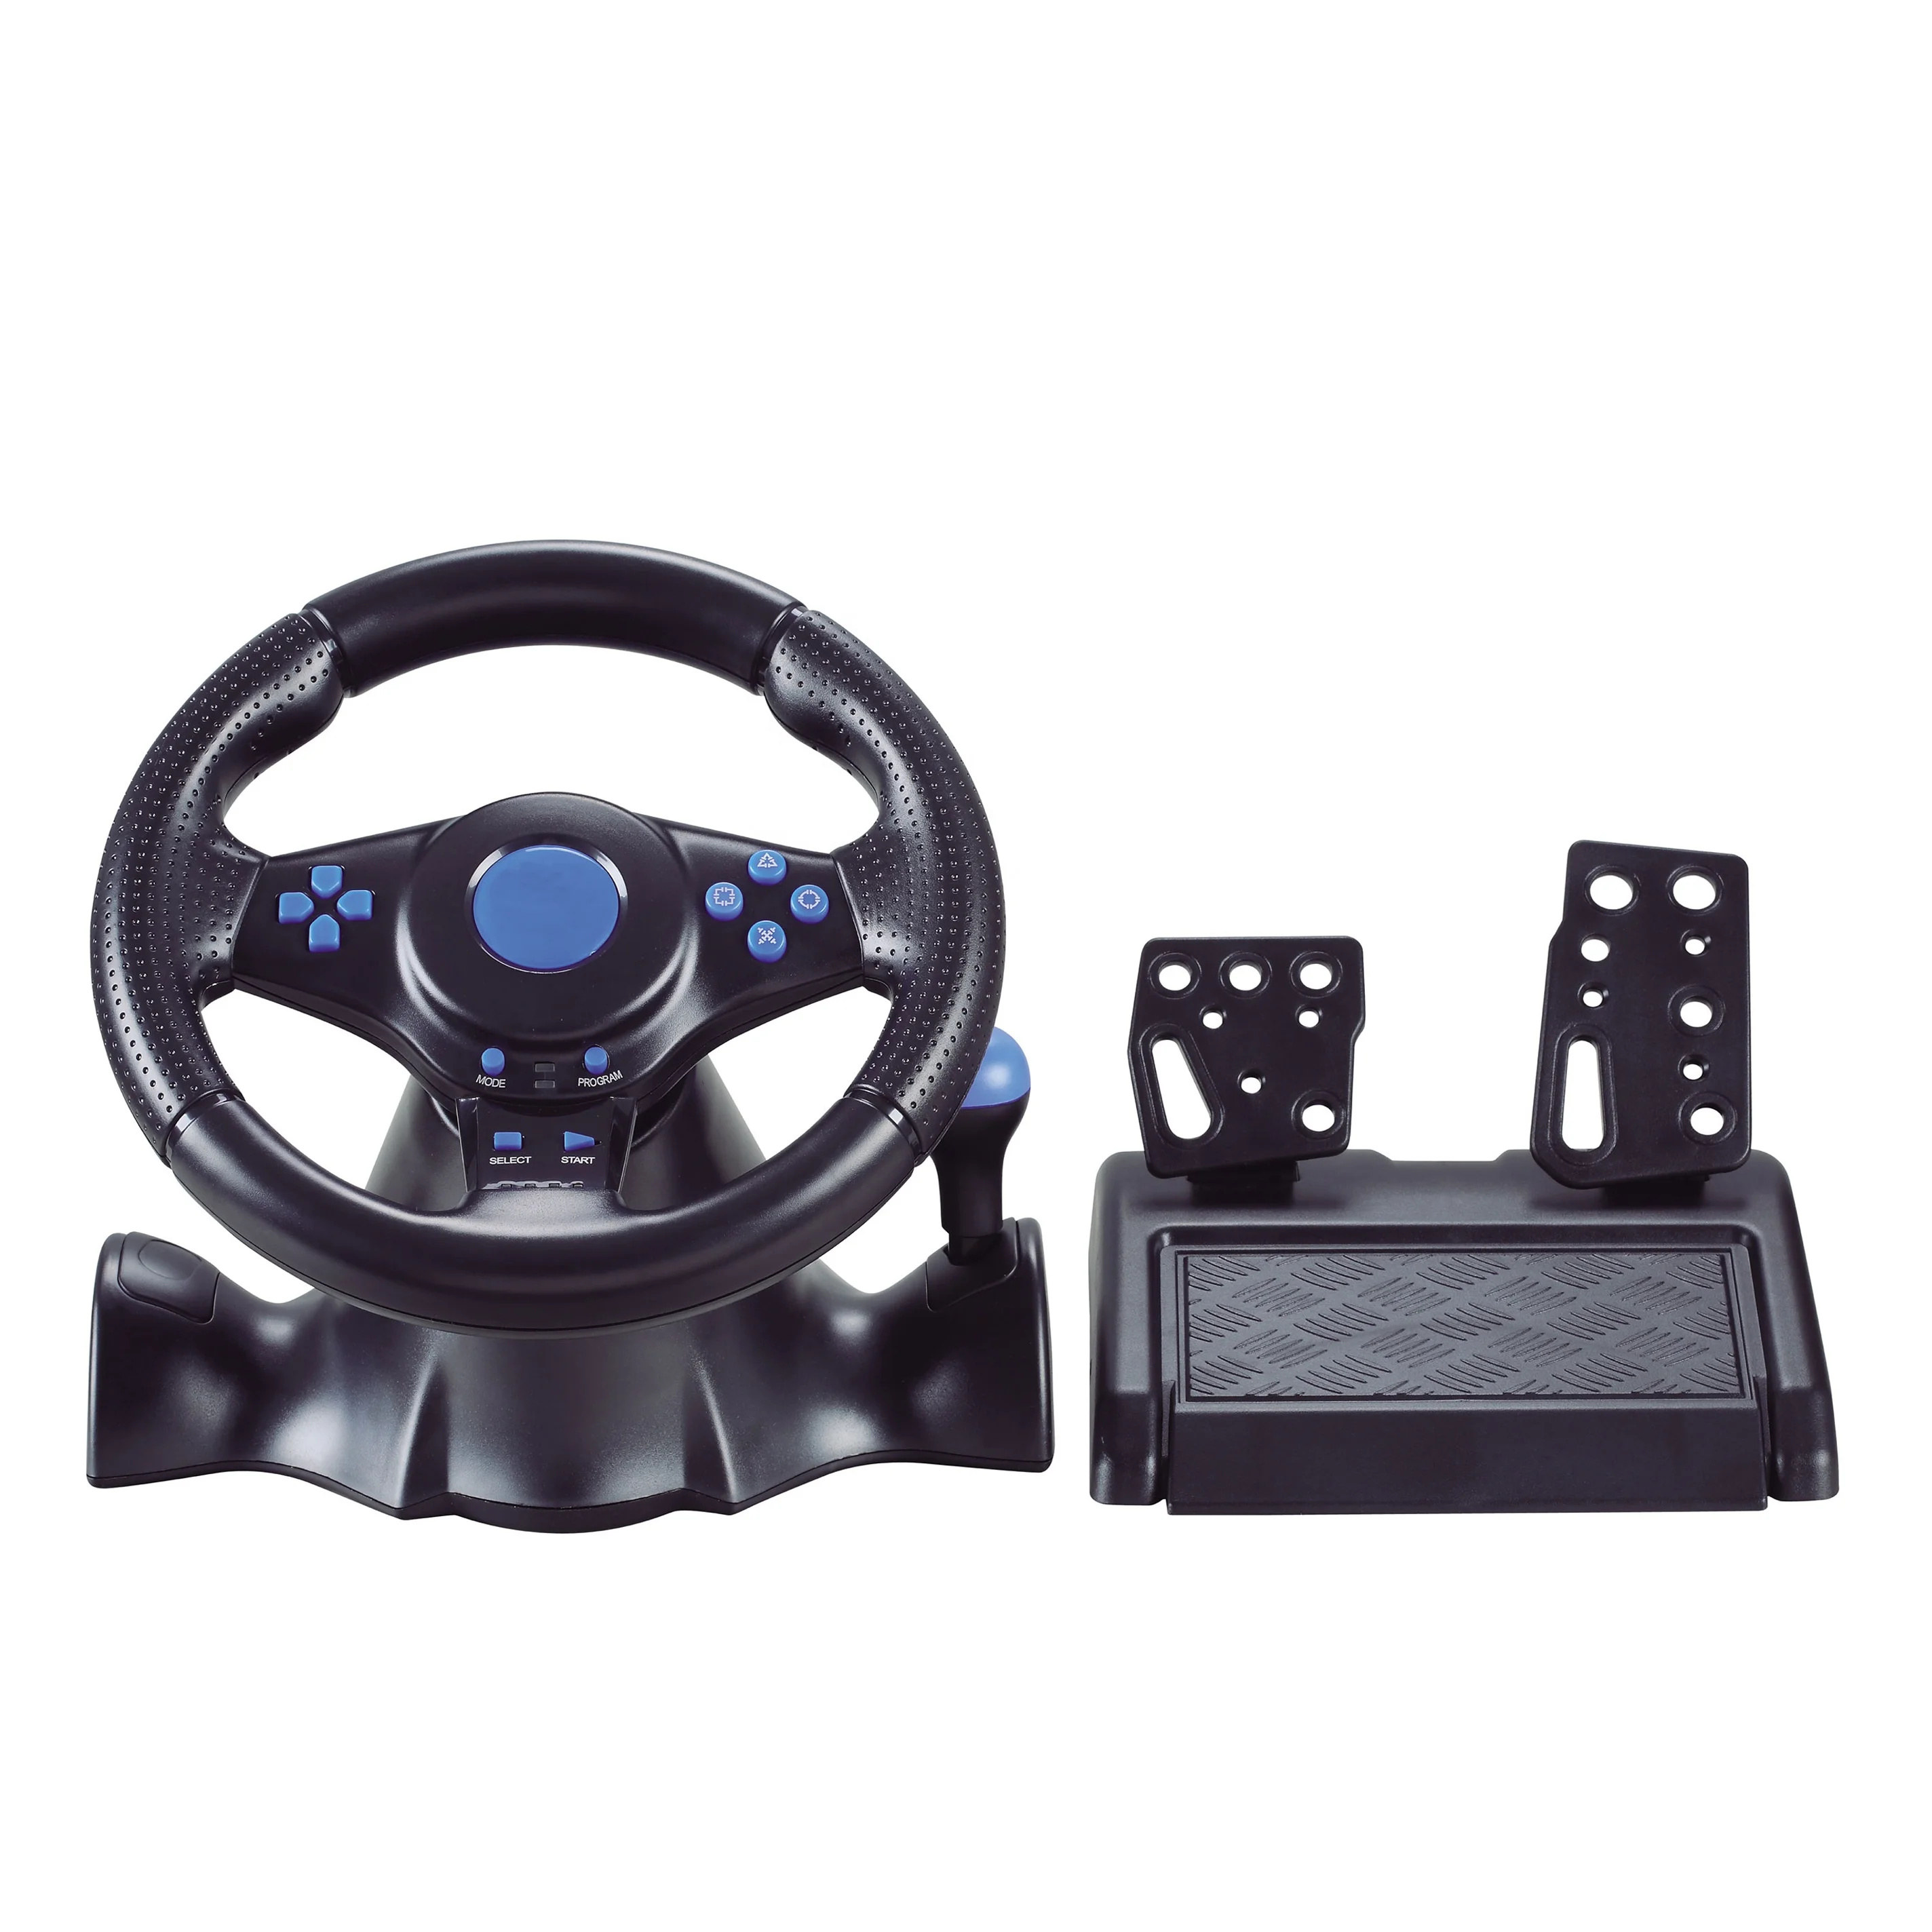 

Factory directly sale 7IN1 Racing game steering wheel Car video gaming for PS4/ PS3/ XBOXONE / XBOX360/ Android/ Switch/ PC